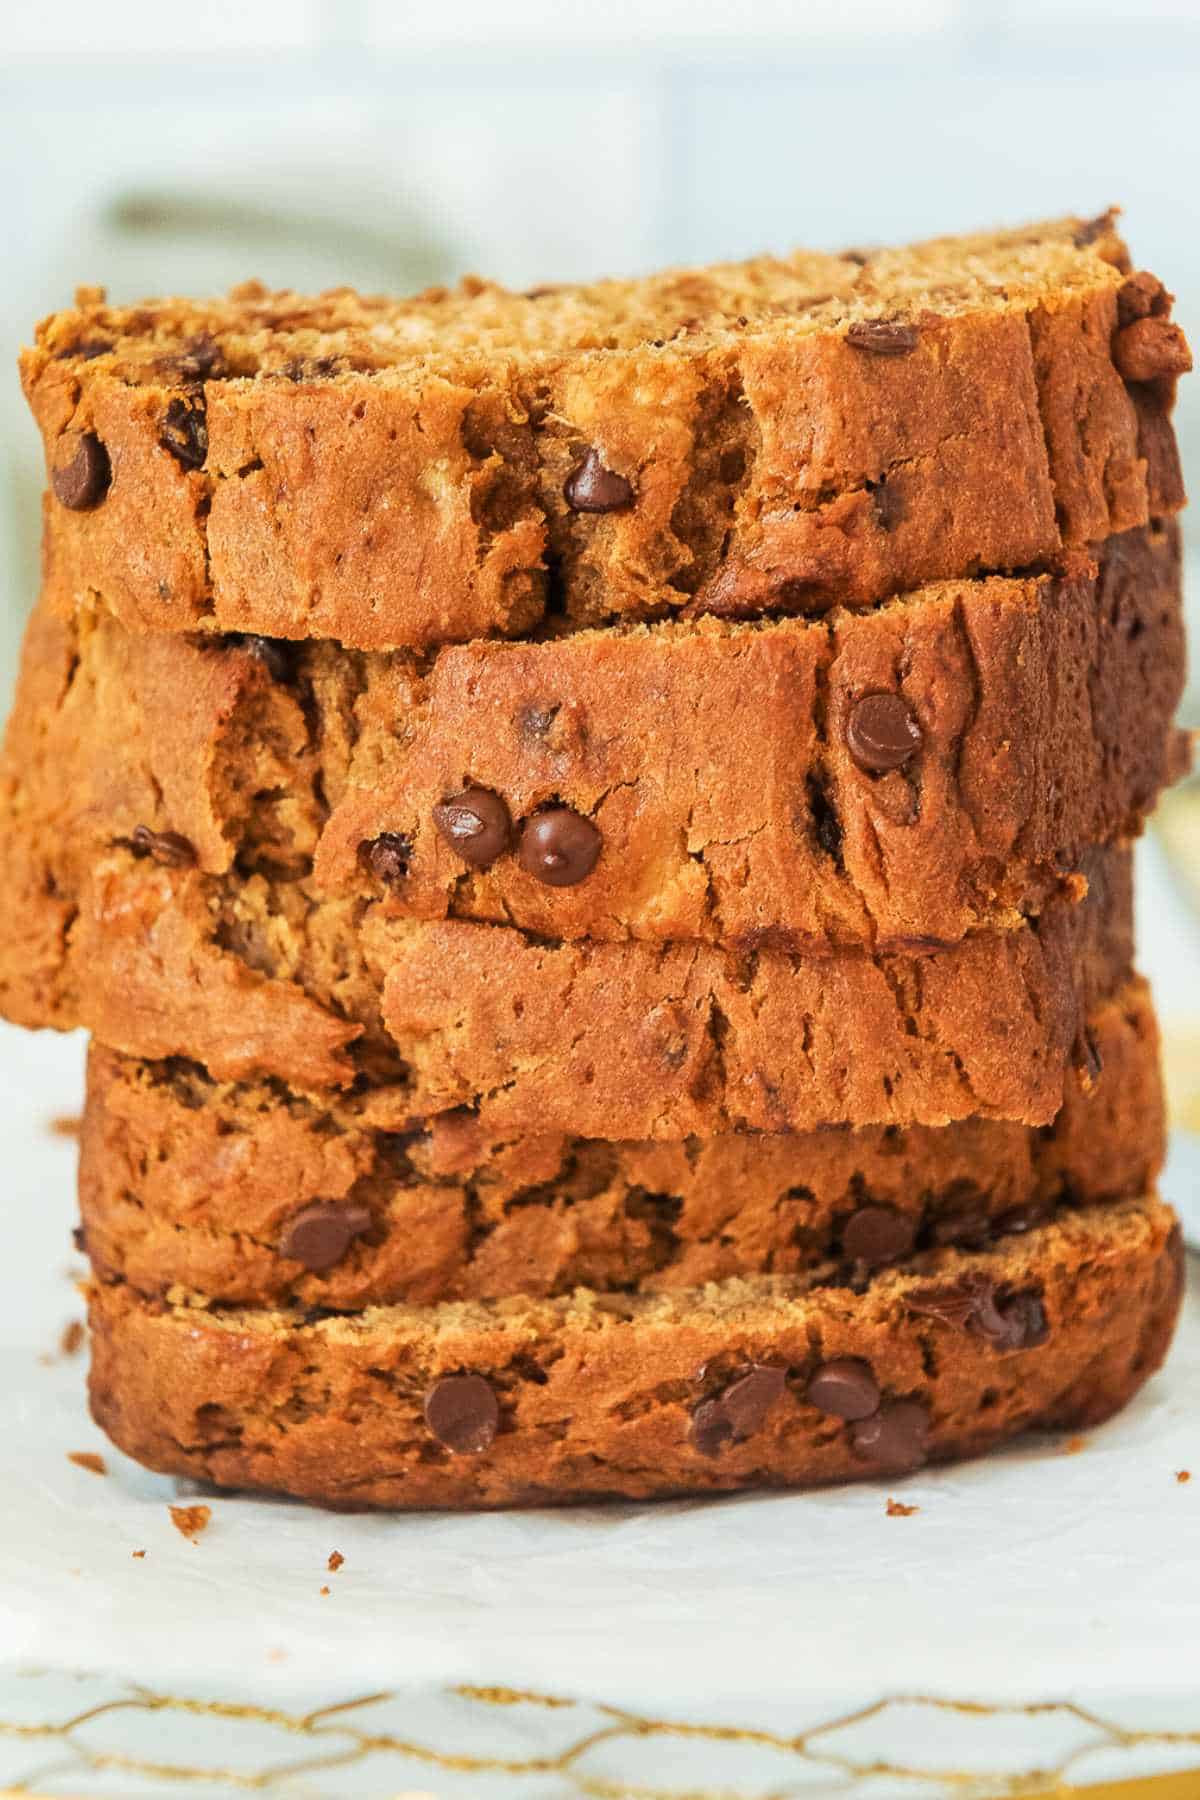 stack of gluten-free dairy-free banana bread with chocolate chips.